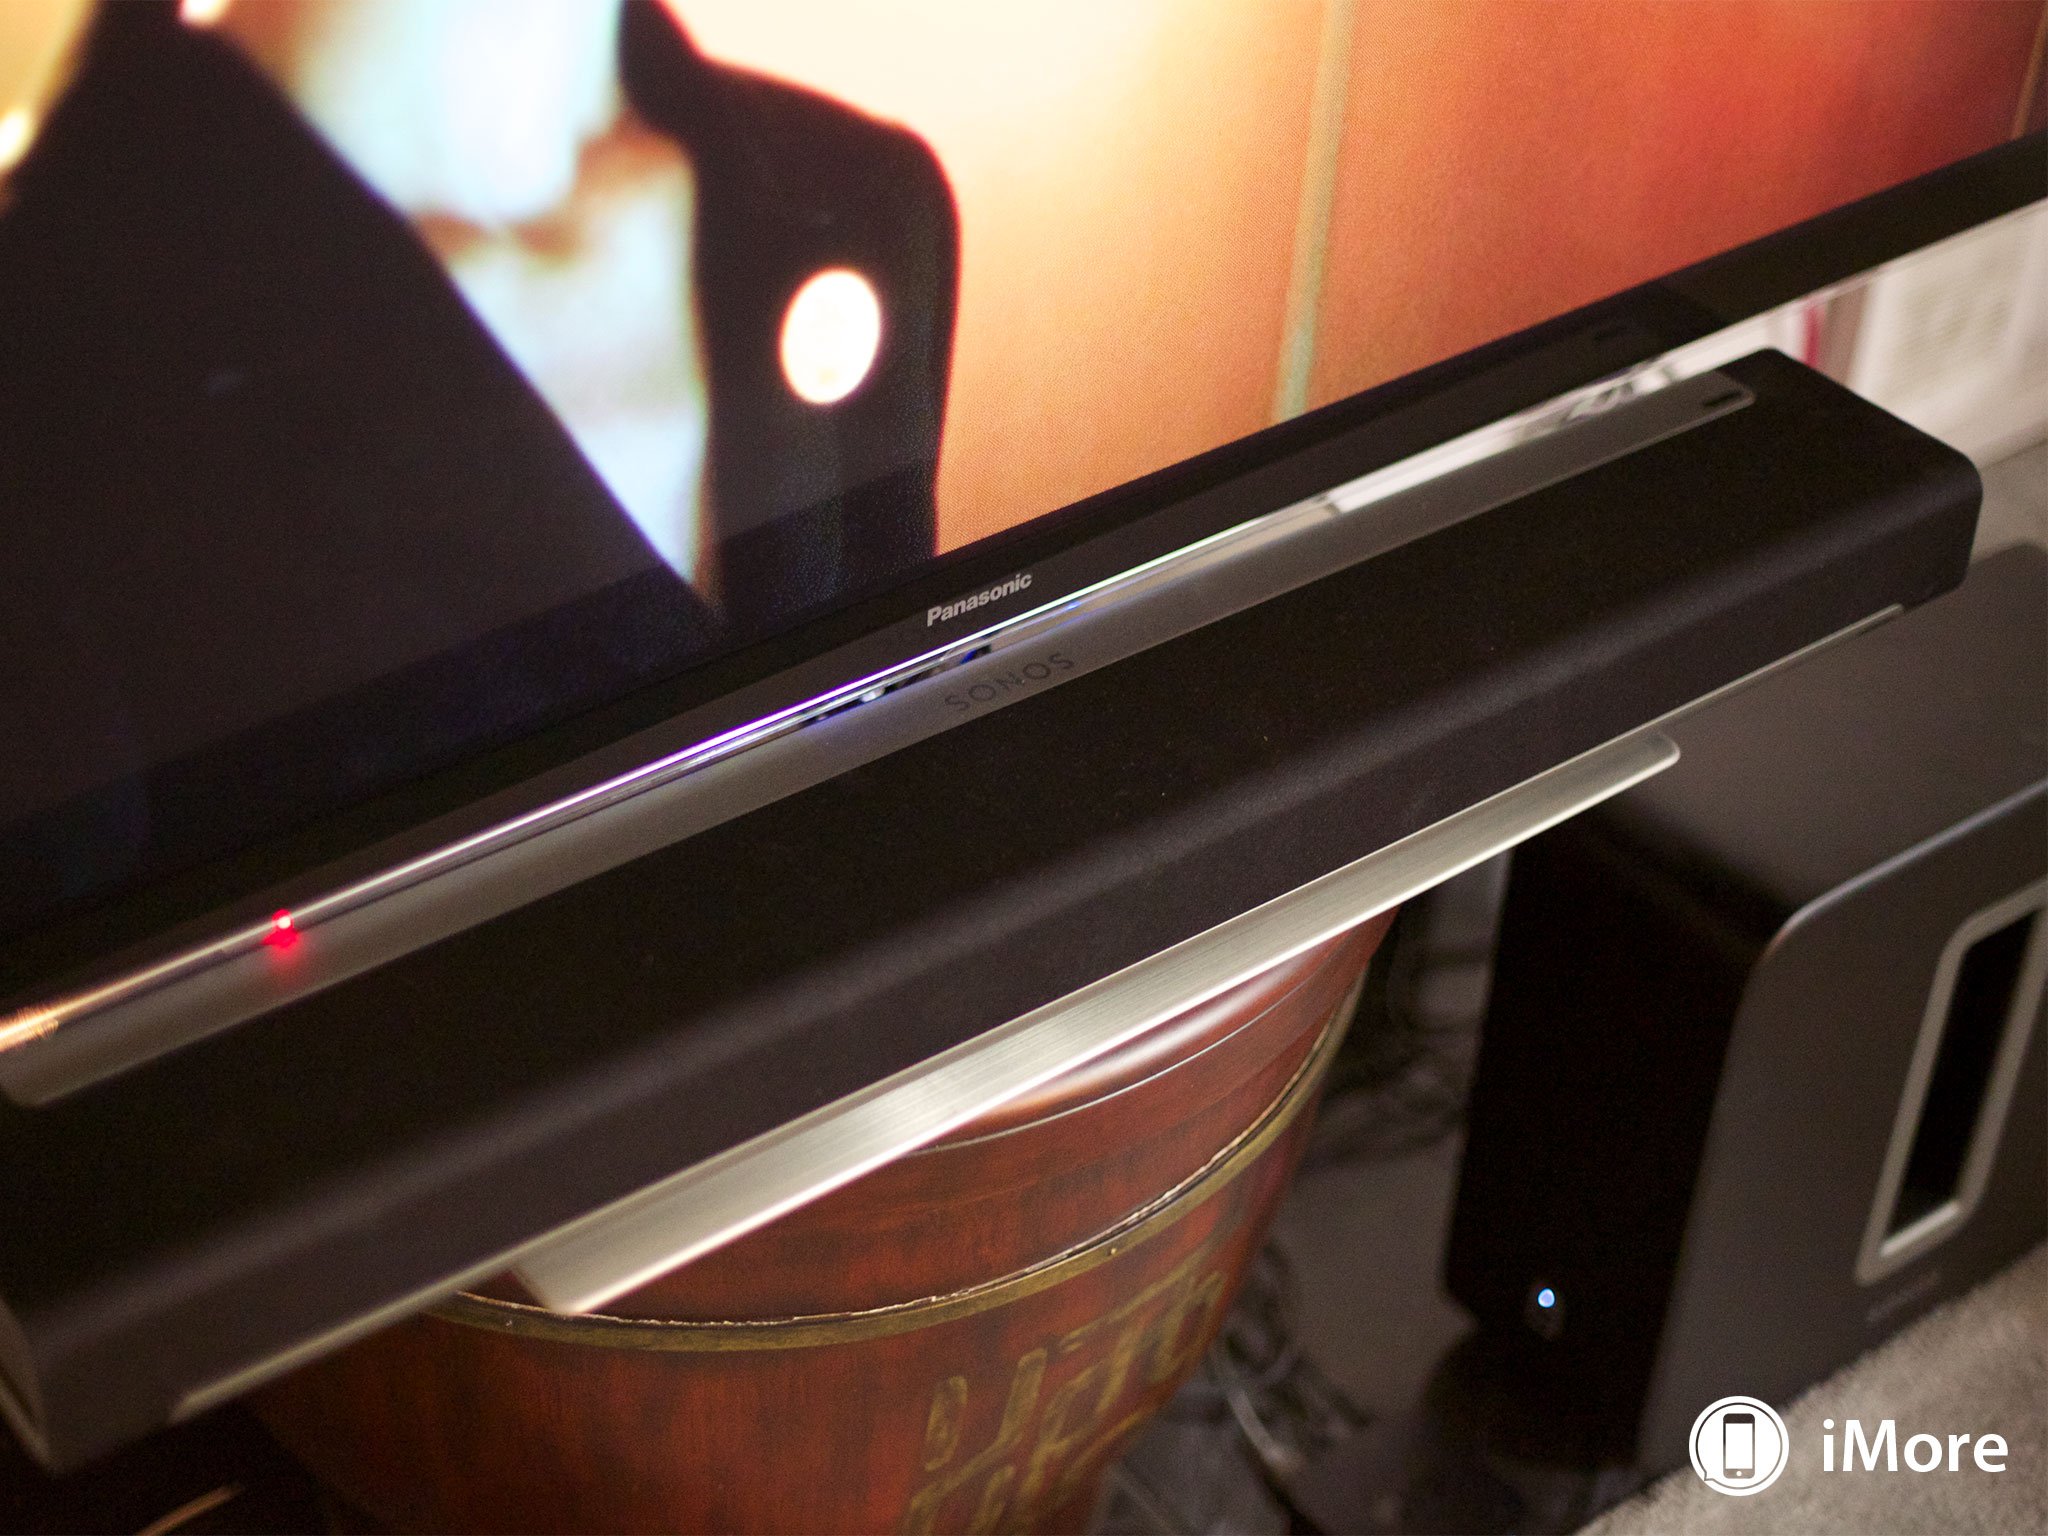 Sonos home theater review: The Wireless future is (almost) here! | iMore1600 x 1200